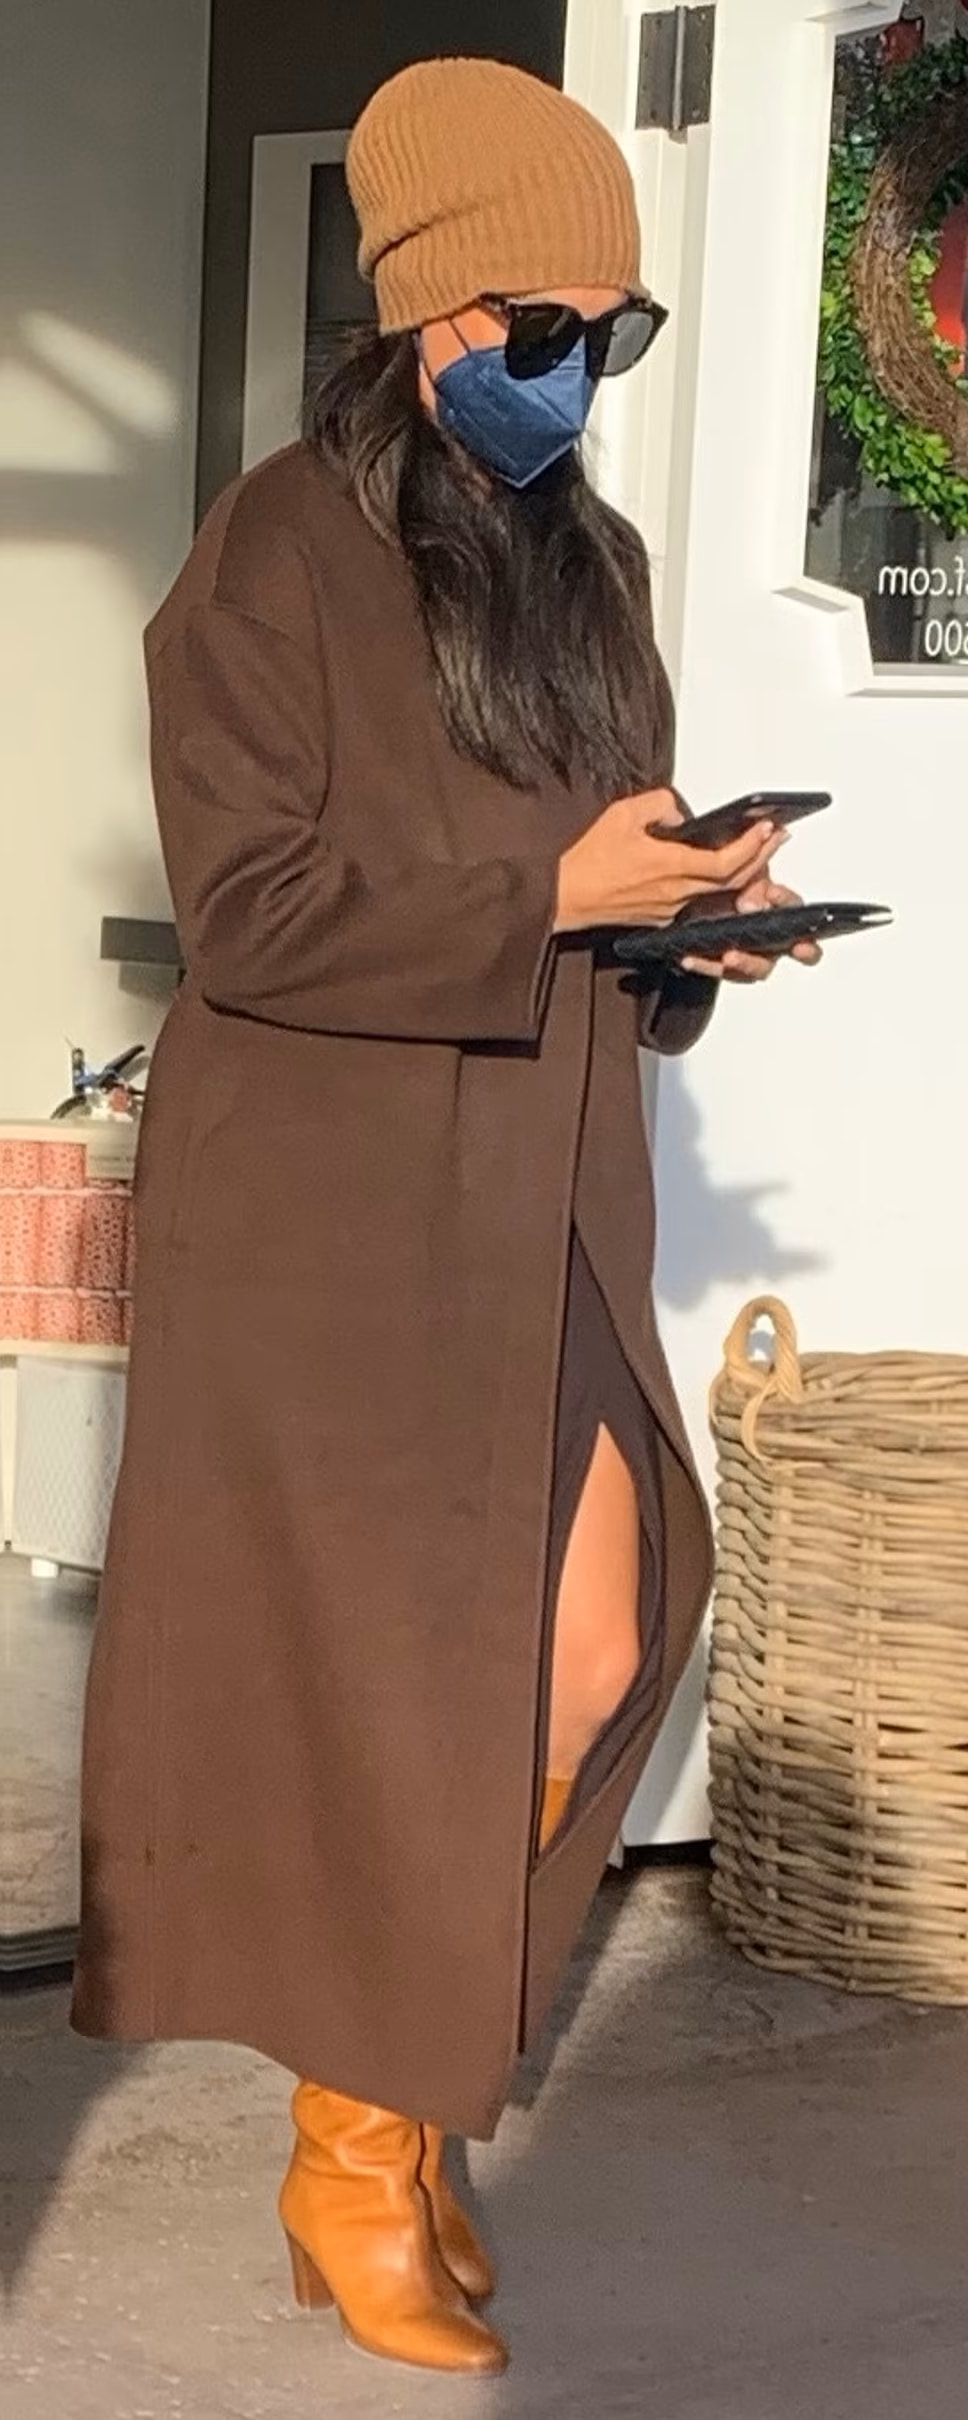 Anine Bing Hunter Coat in Brown as seen on Meghan Markle, The Duchess of Sussex.